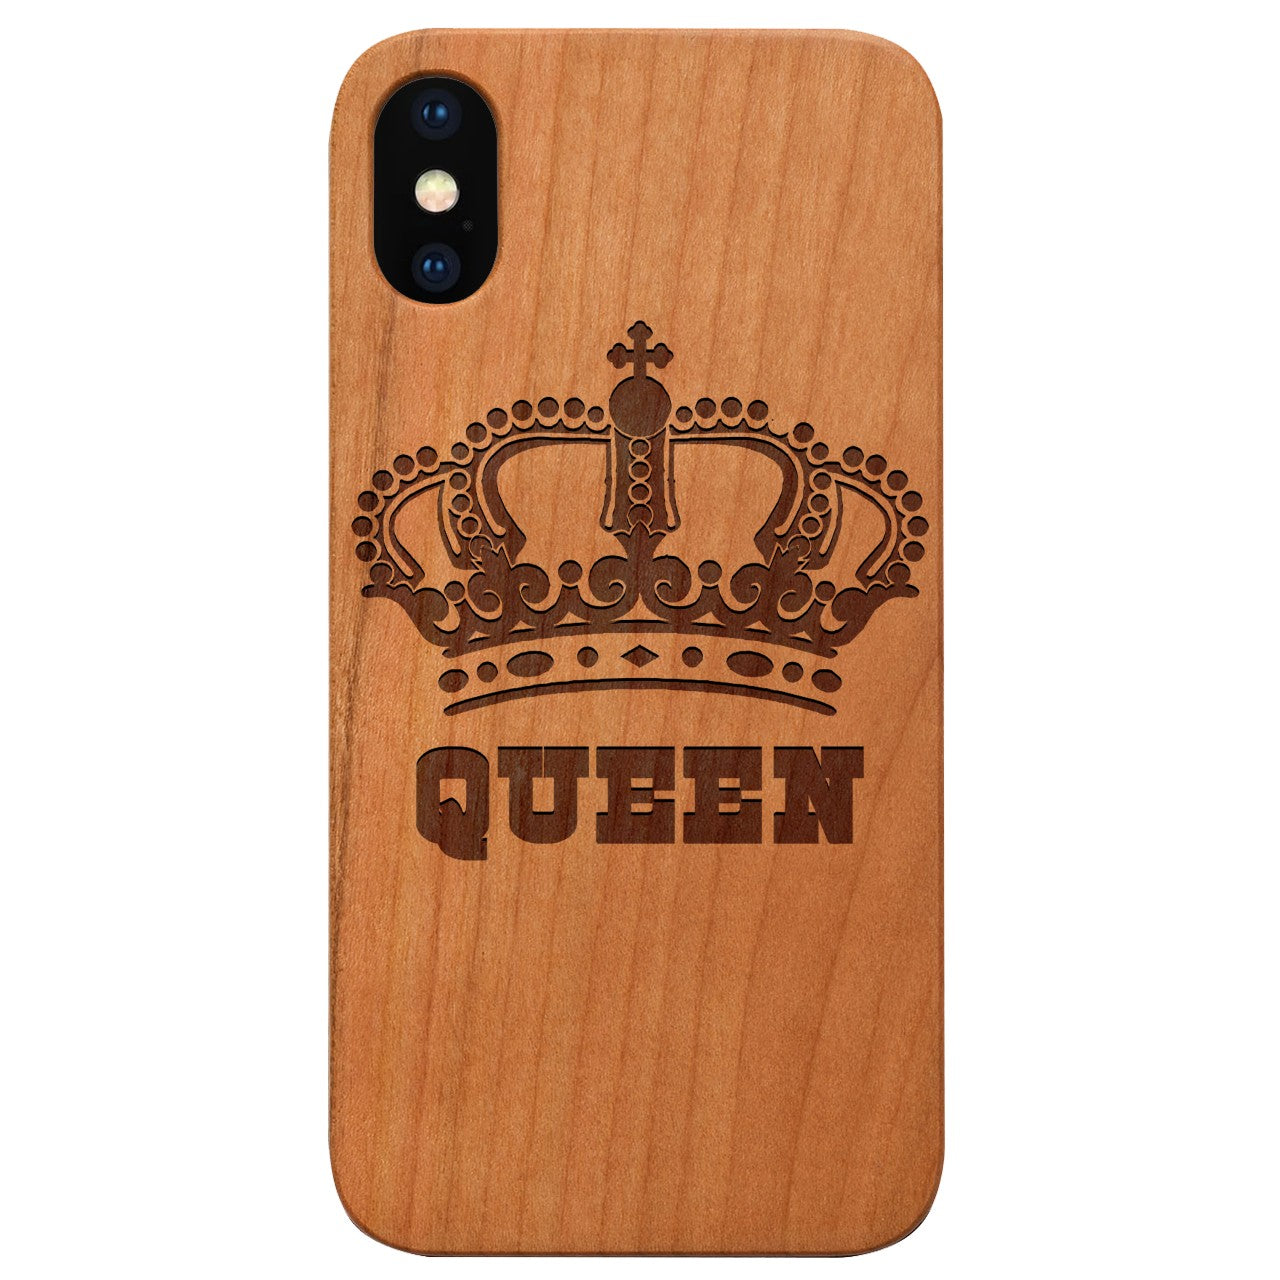  Queen - Engraved - Wooden Phone Case - IPhone 13 Models